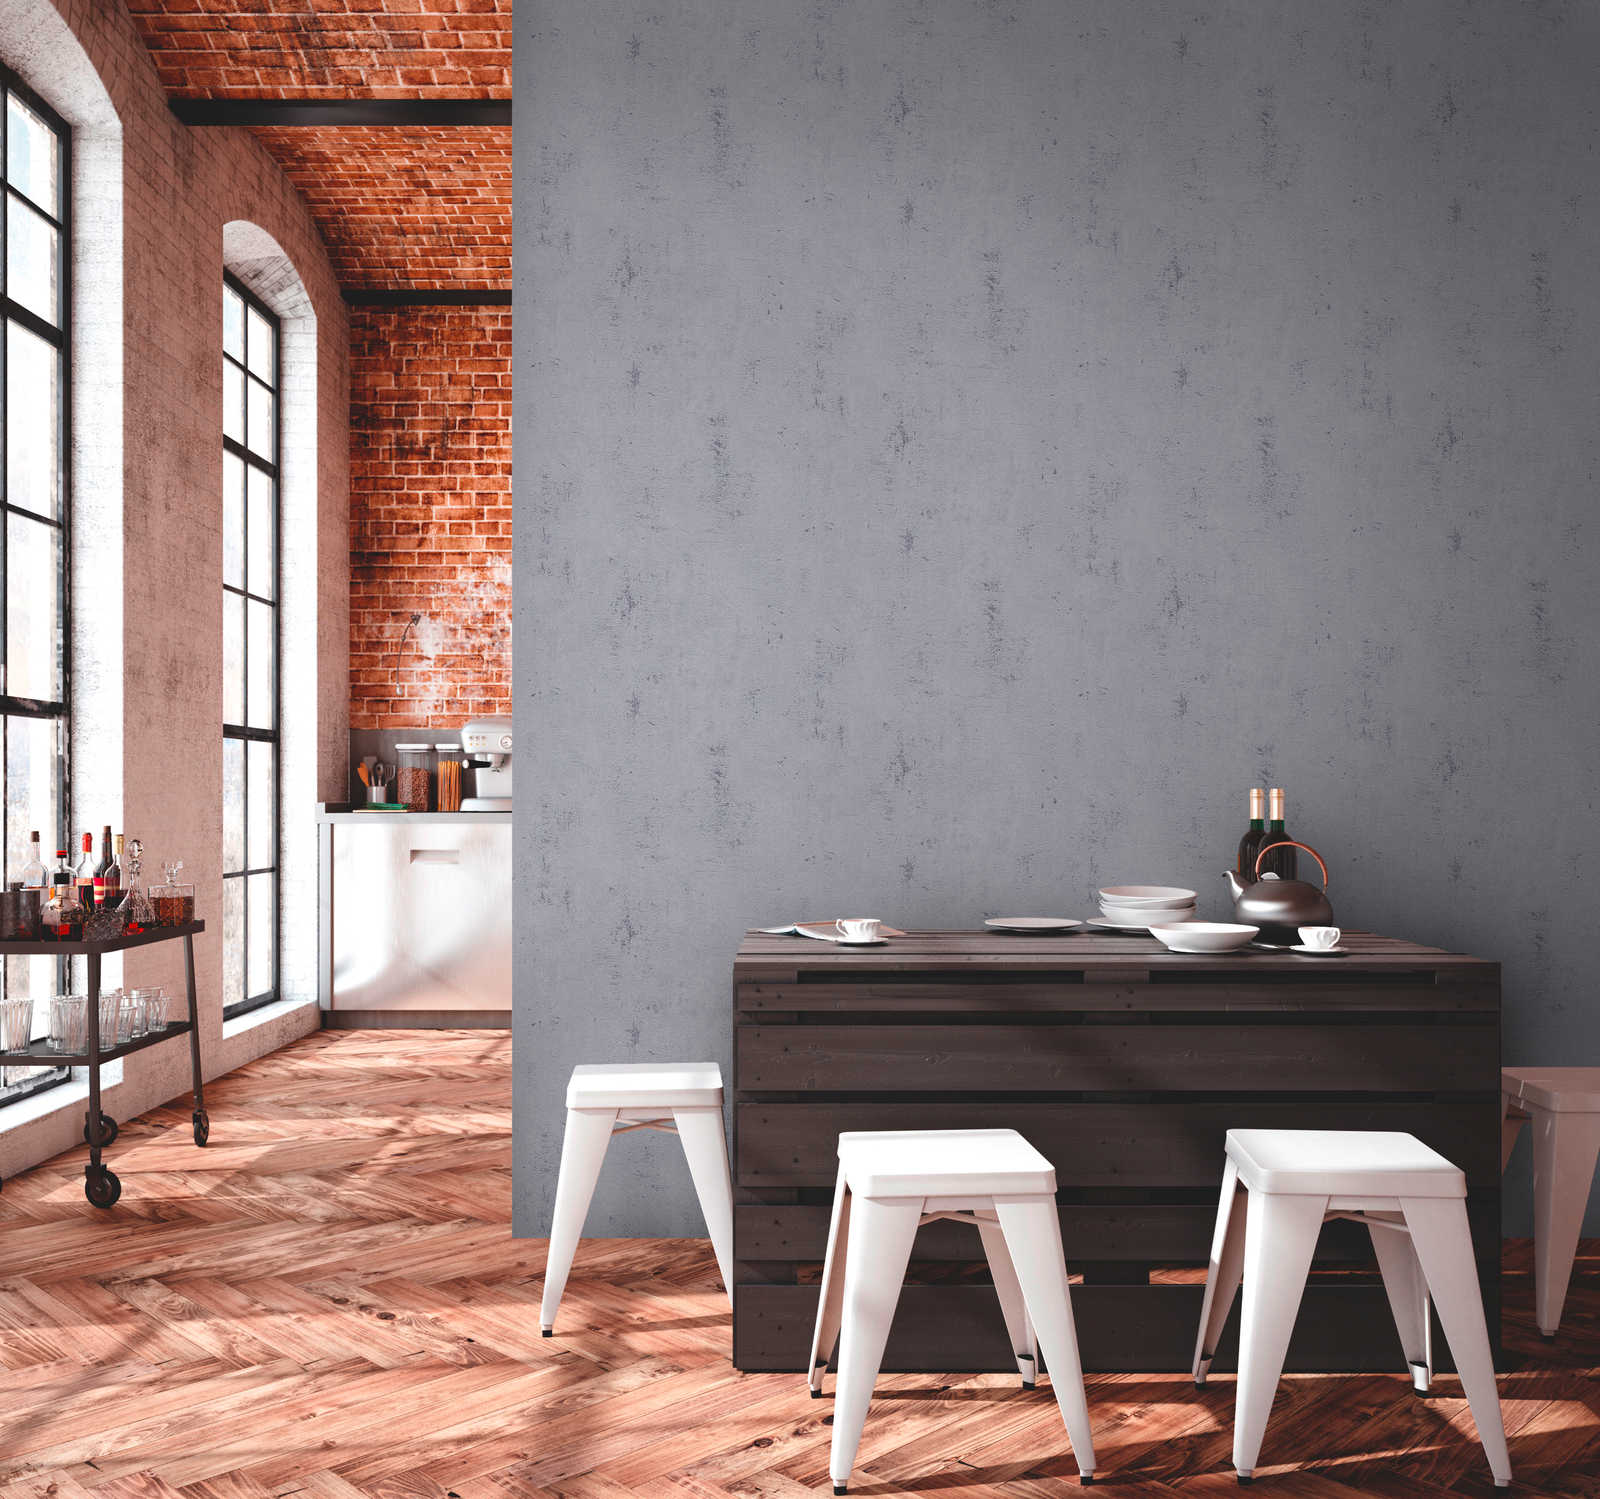             Wallpaper with neutral plaster look in industrial style - grey
        